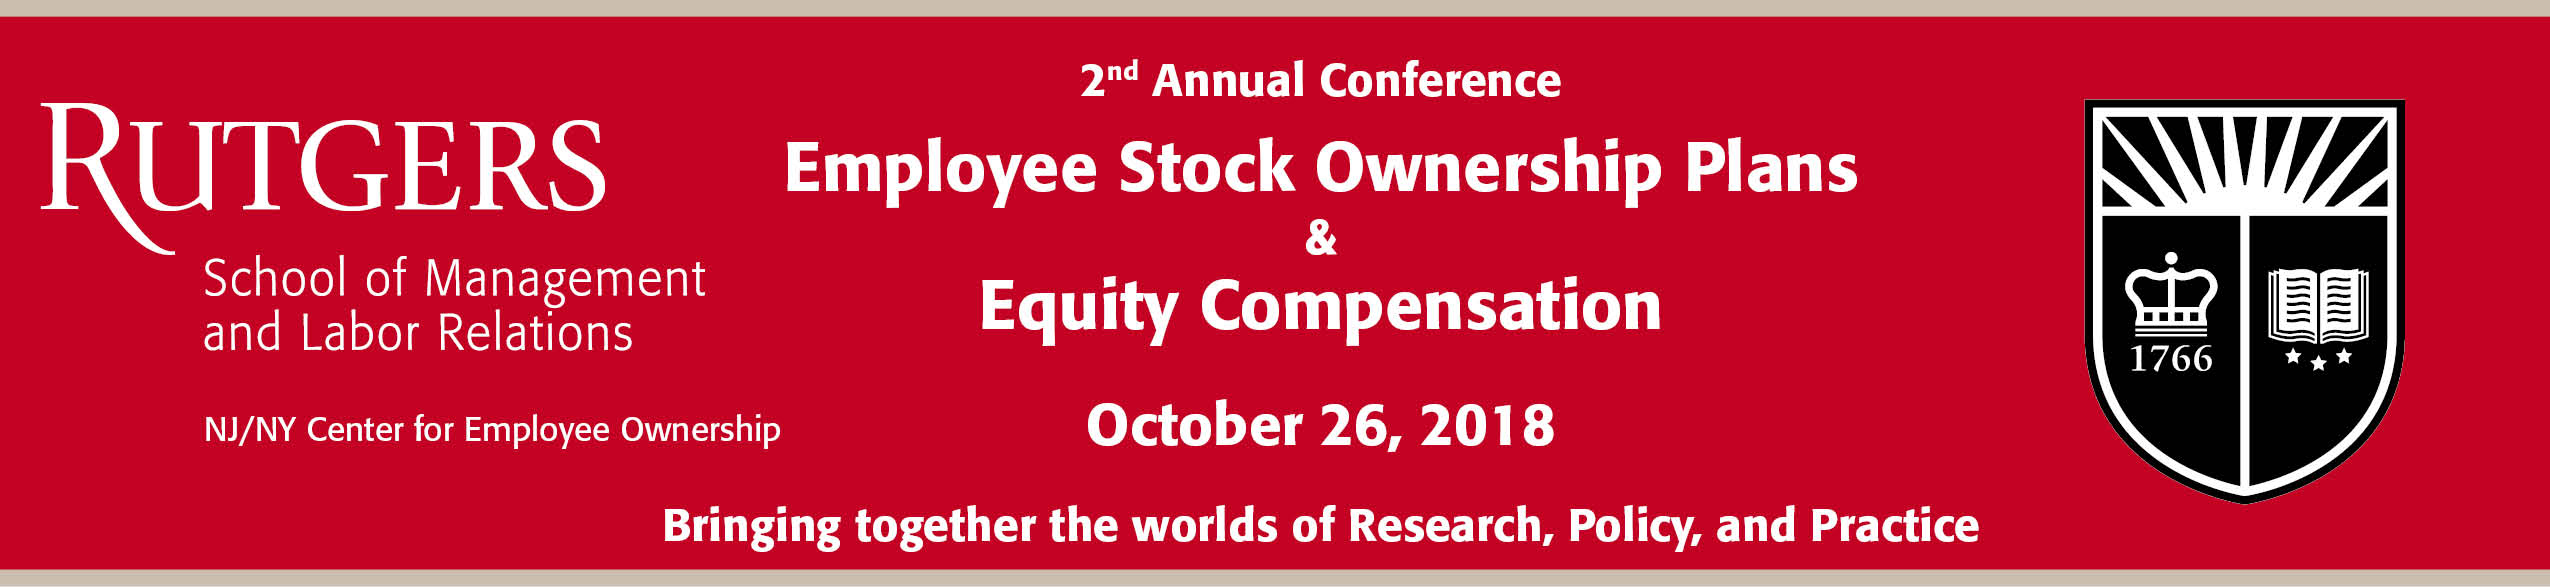 2018 NJ/NY Center for Employee Ownership Annual Conference